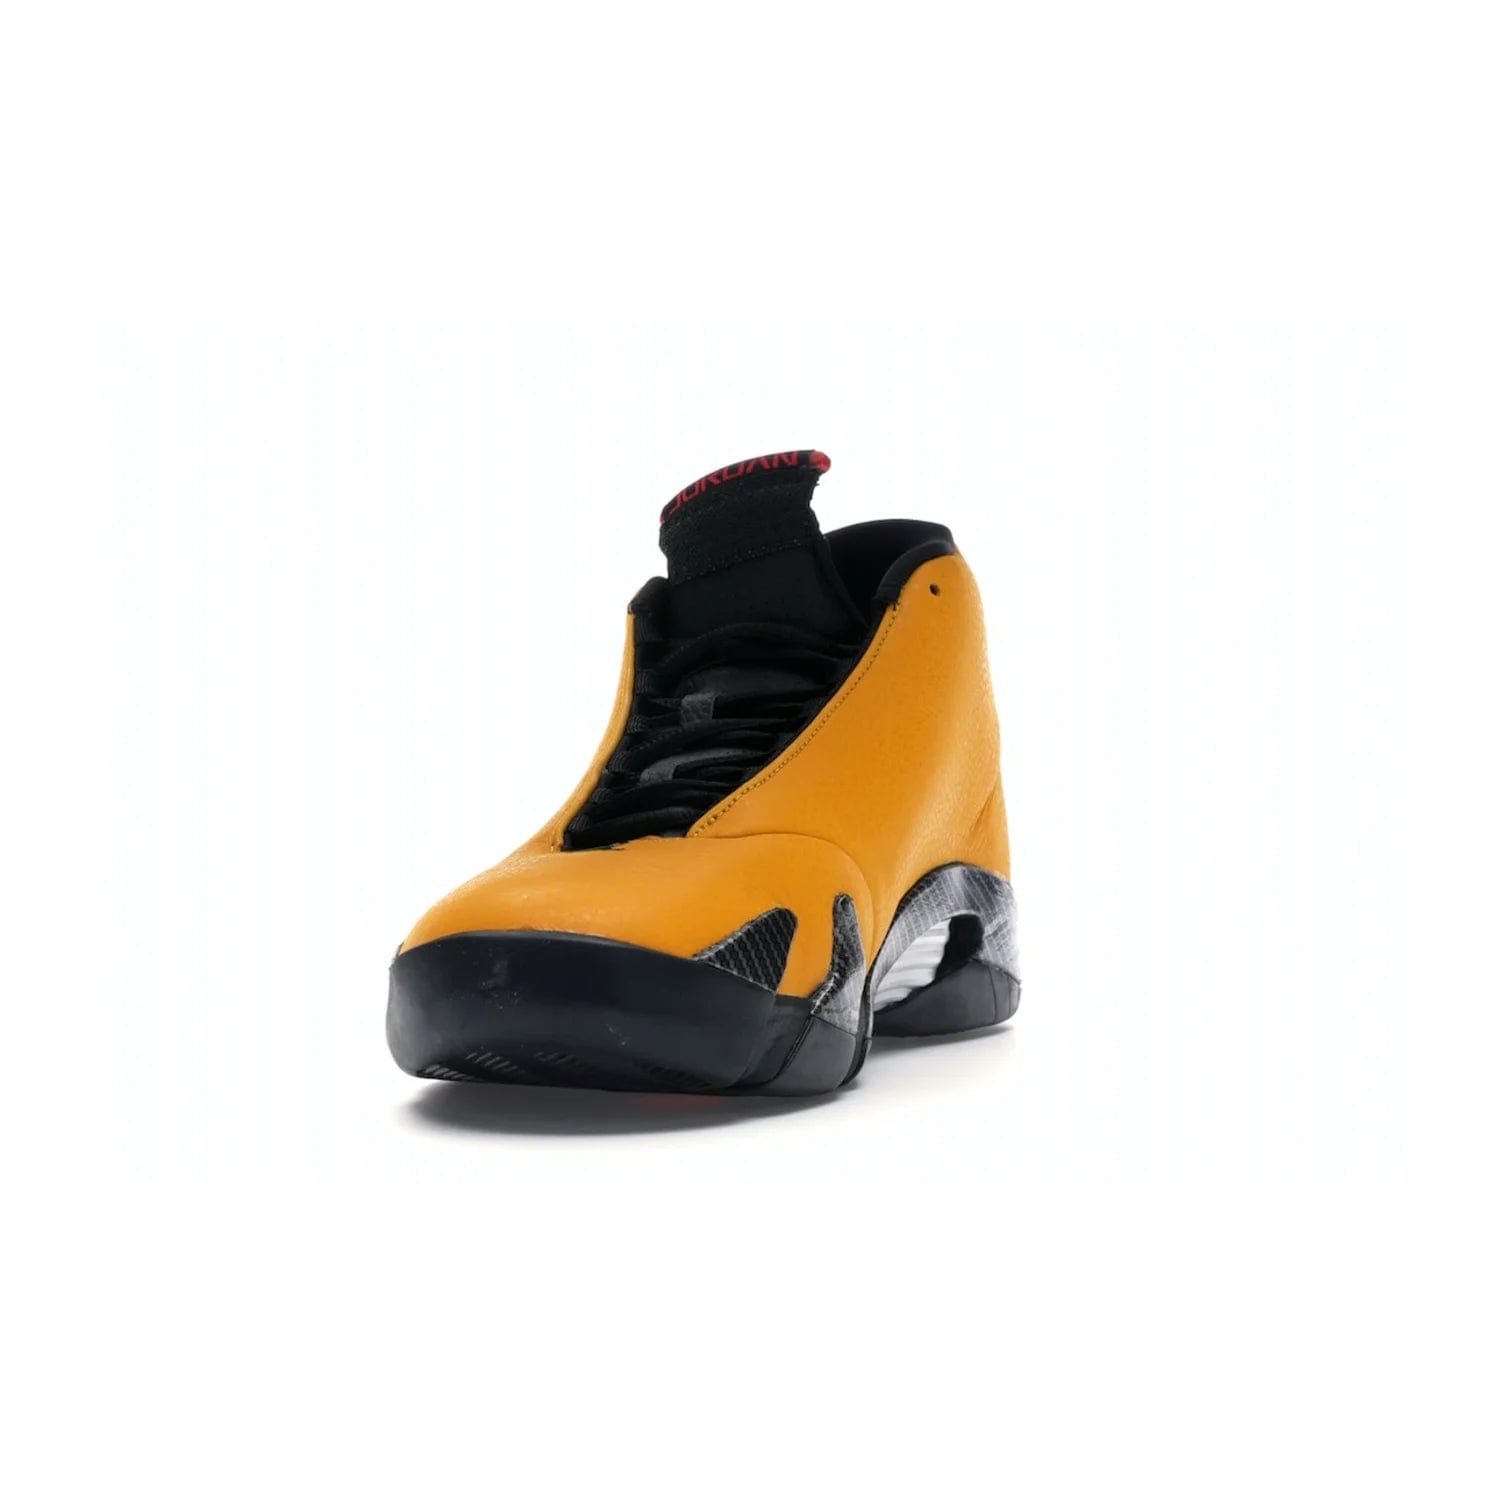 Jordan 14 Retro University Gold - Image 12 - Only at www.BallersClubKickz.com - Air Jordan 14 Retro University Gold: High-quality leather sneaker with Jumpman, tongue & heel logos. Zoom Air units & herringbone traction for superior comfort. University Gold outsole for stylish streetwear.